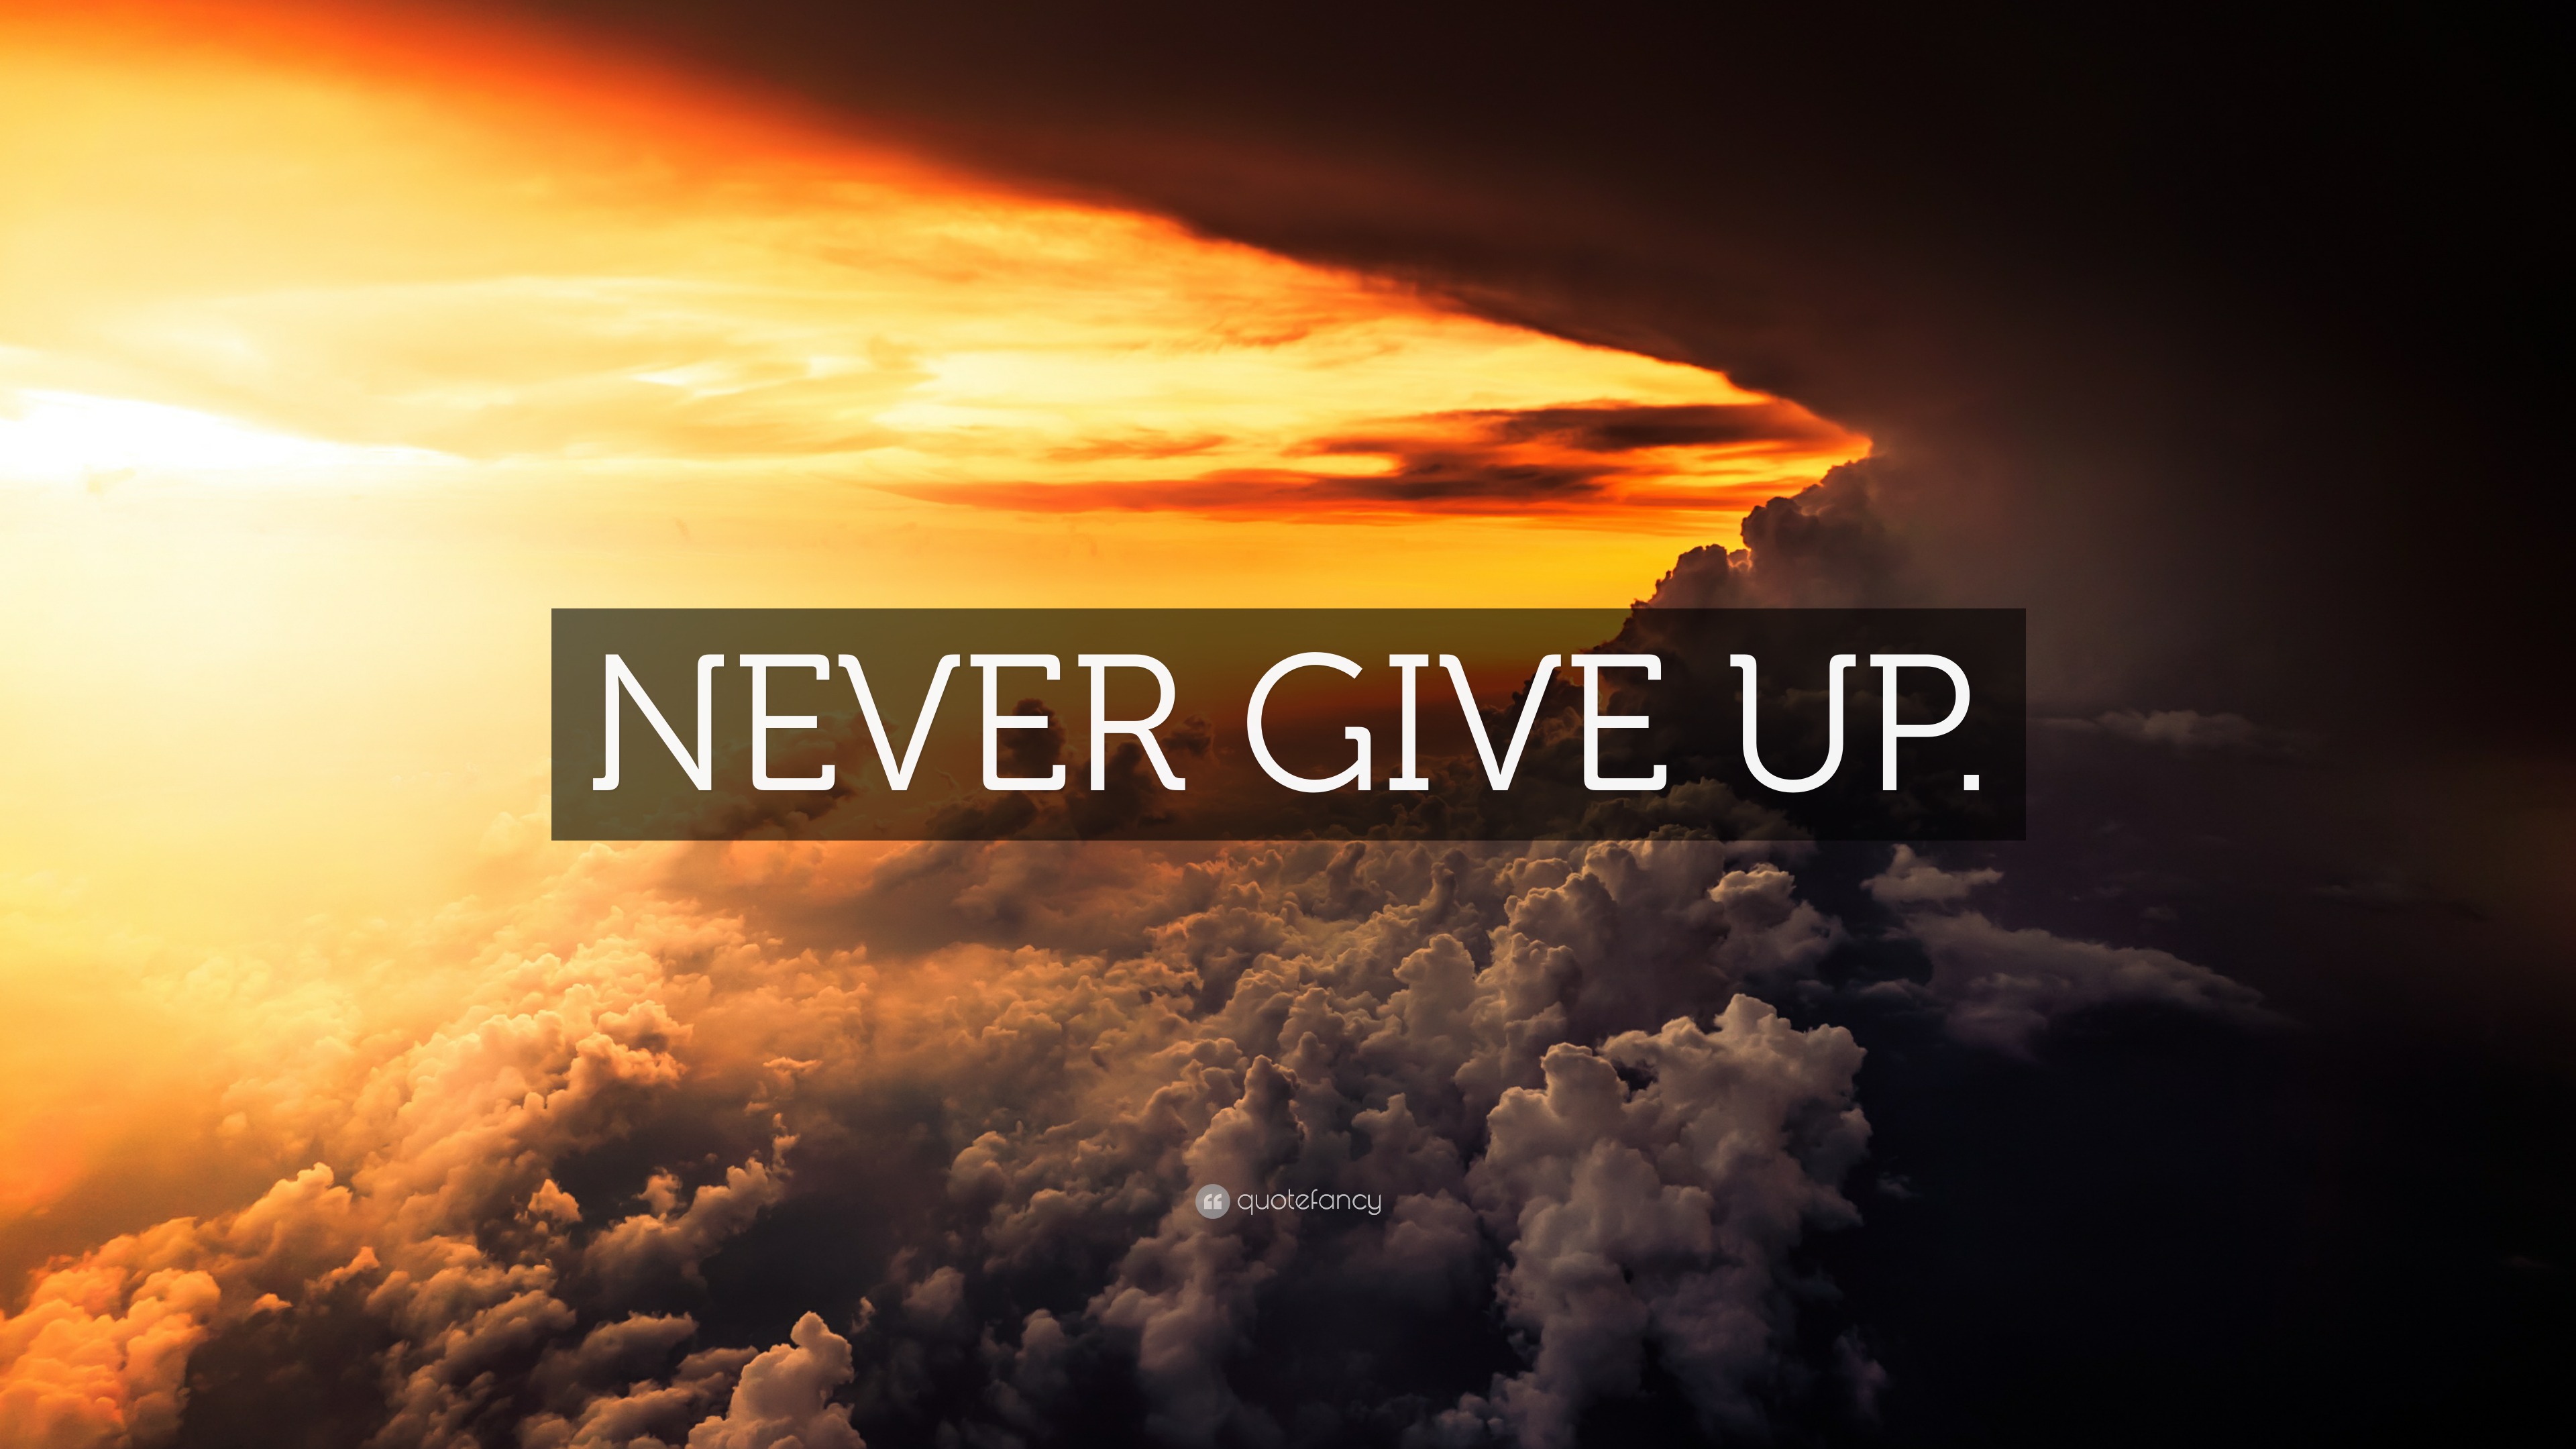 “NEVER GIVE UP.” Wallpaper by QuoteFancy